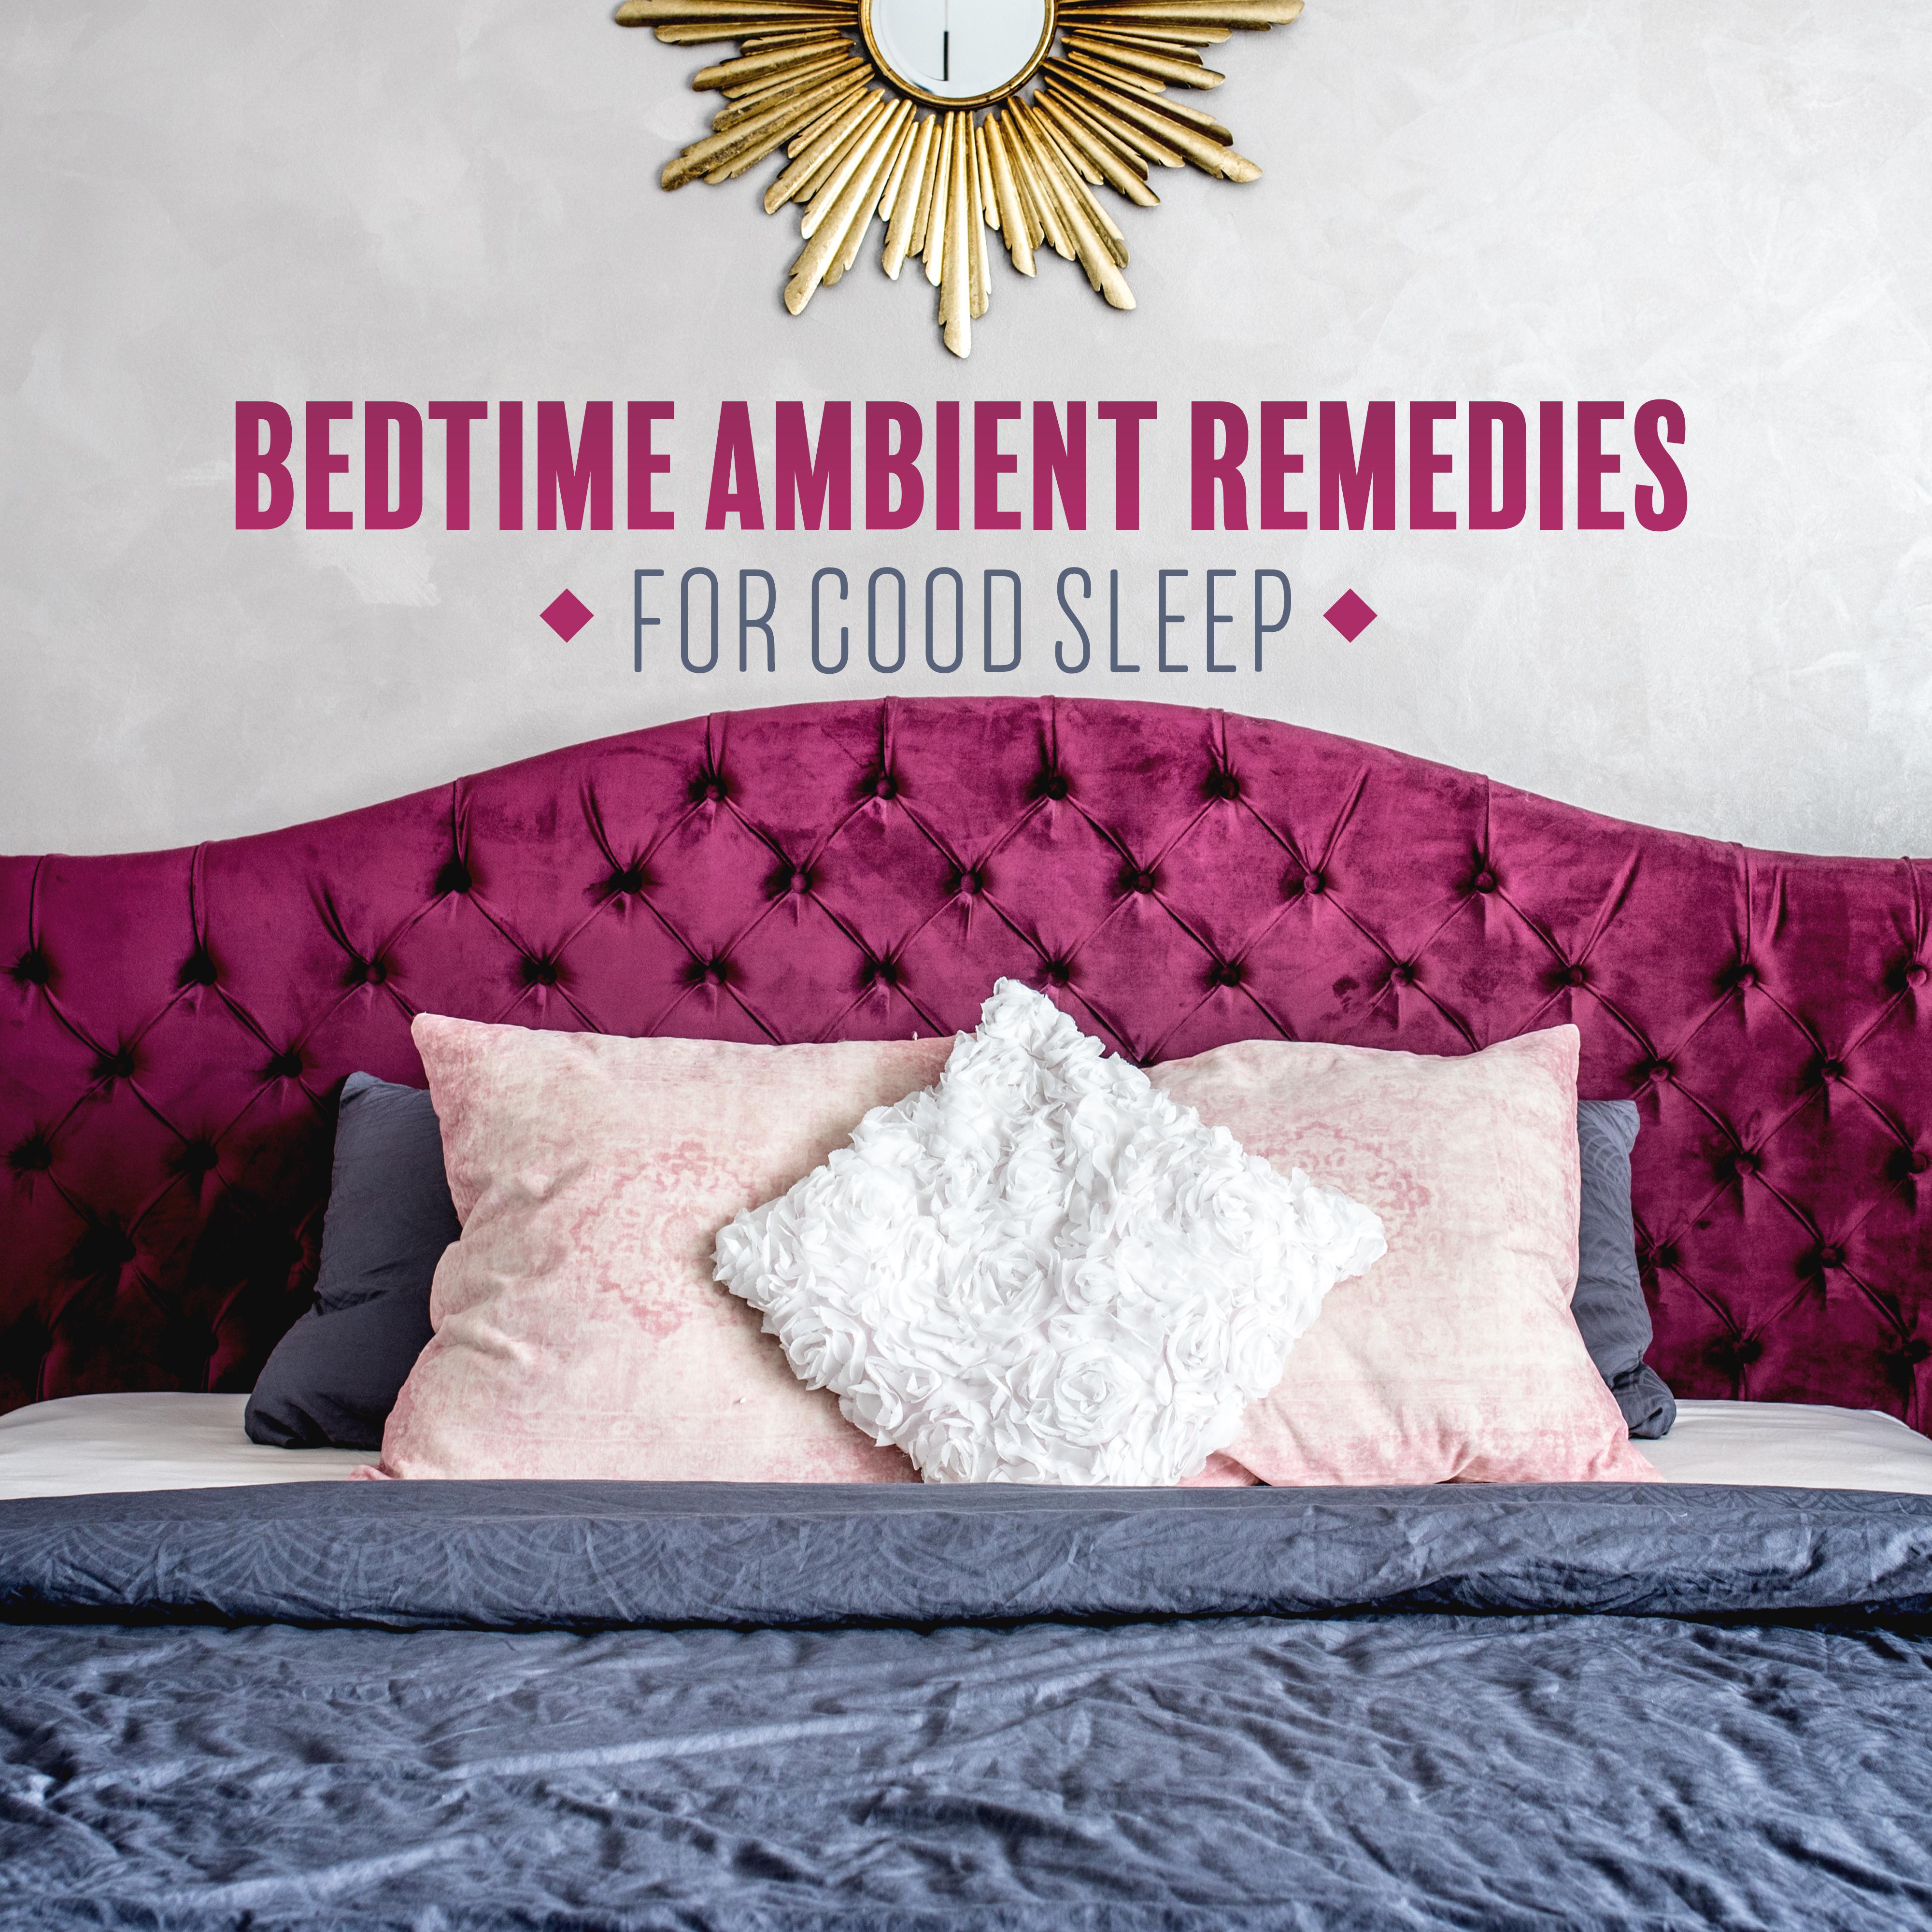 Bedtime Ambient Remedies for Good Sleep: 2019 New Age Deep Ambient Music for Rest & Good Sleep, Cure Insomnia, De-stress, Calm Down